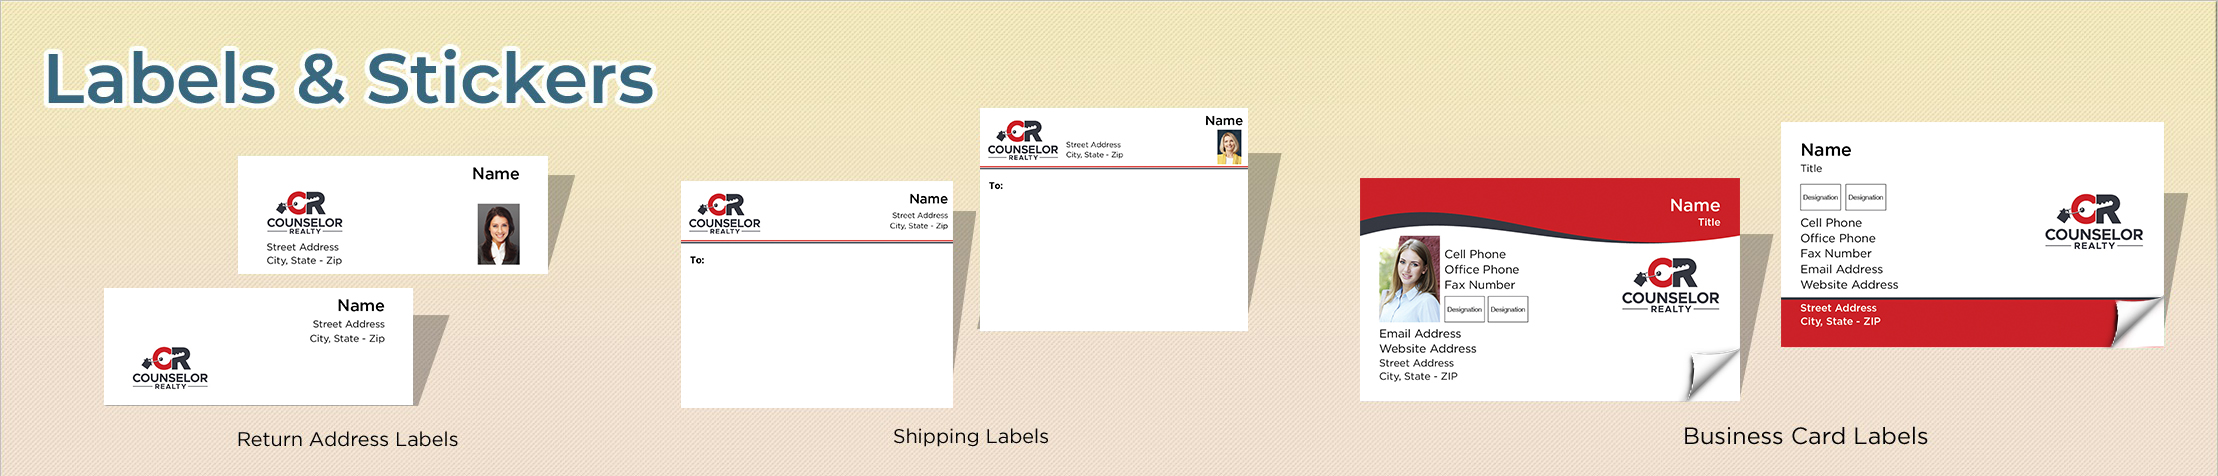 Counselor Realty Real Estate Labels and Stickers - Counselor Realty  business card labels, return address labels, shipping labels, and assorted stickers | BestPrintBuy.com